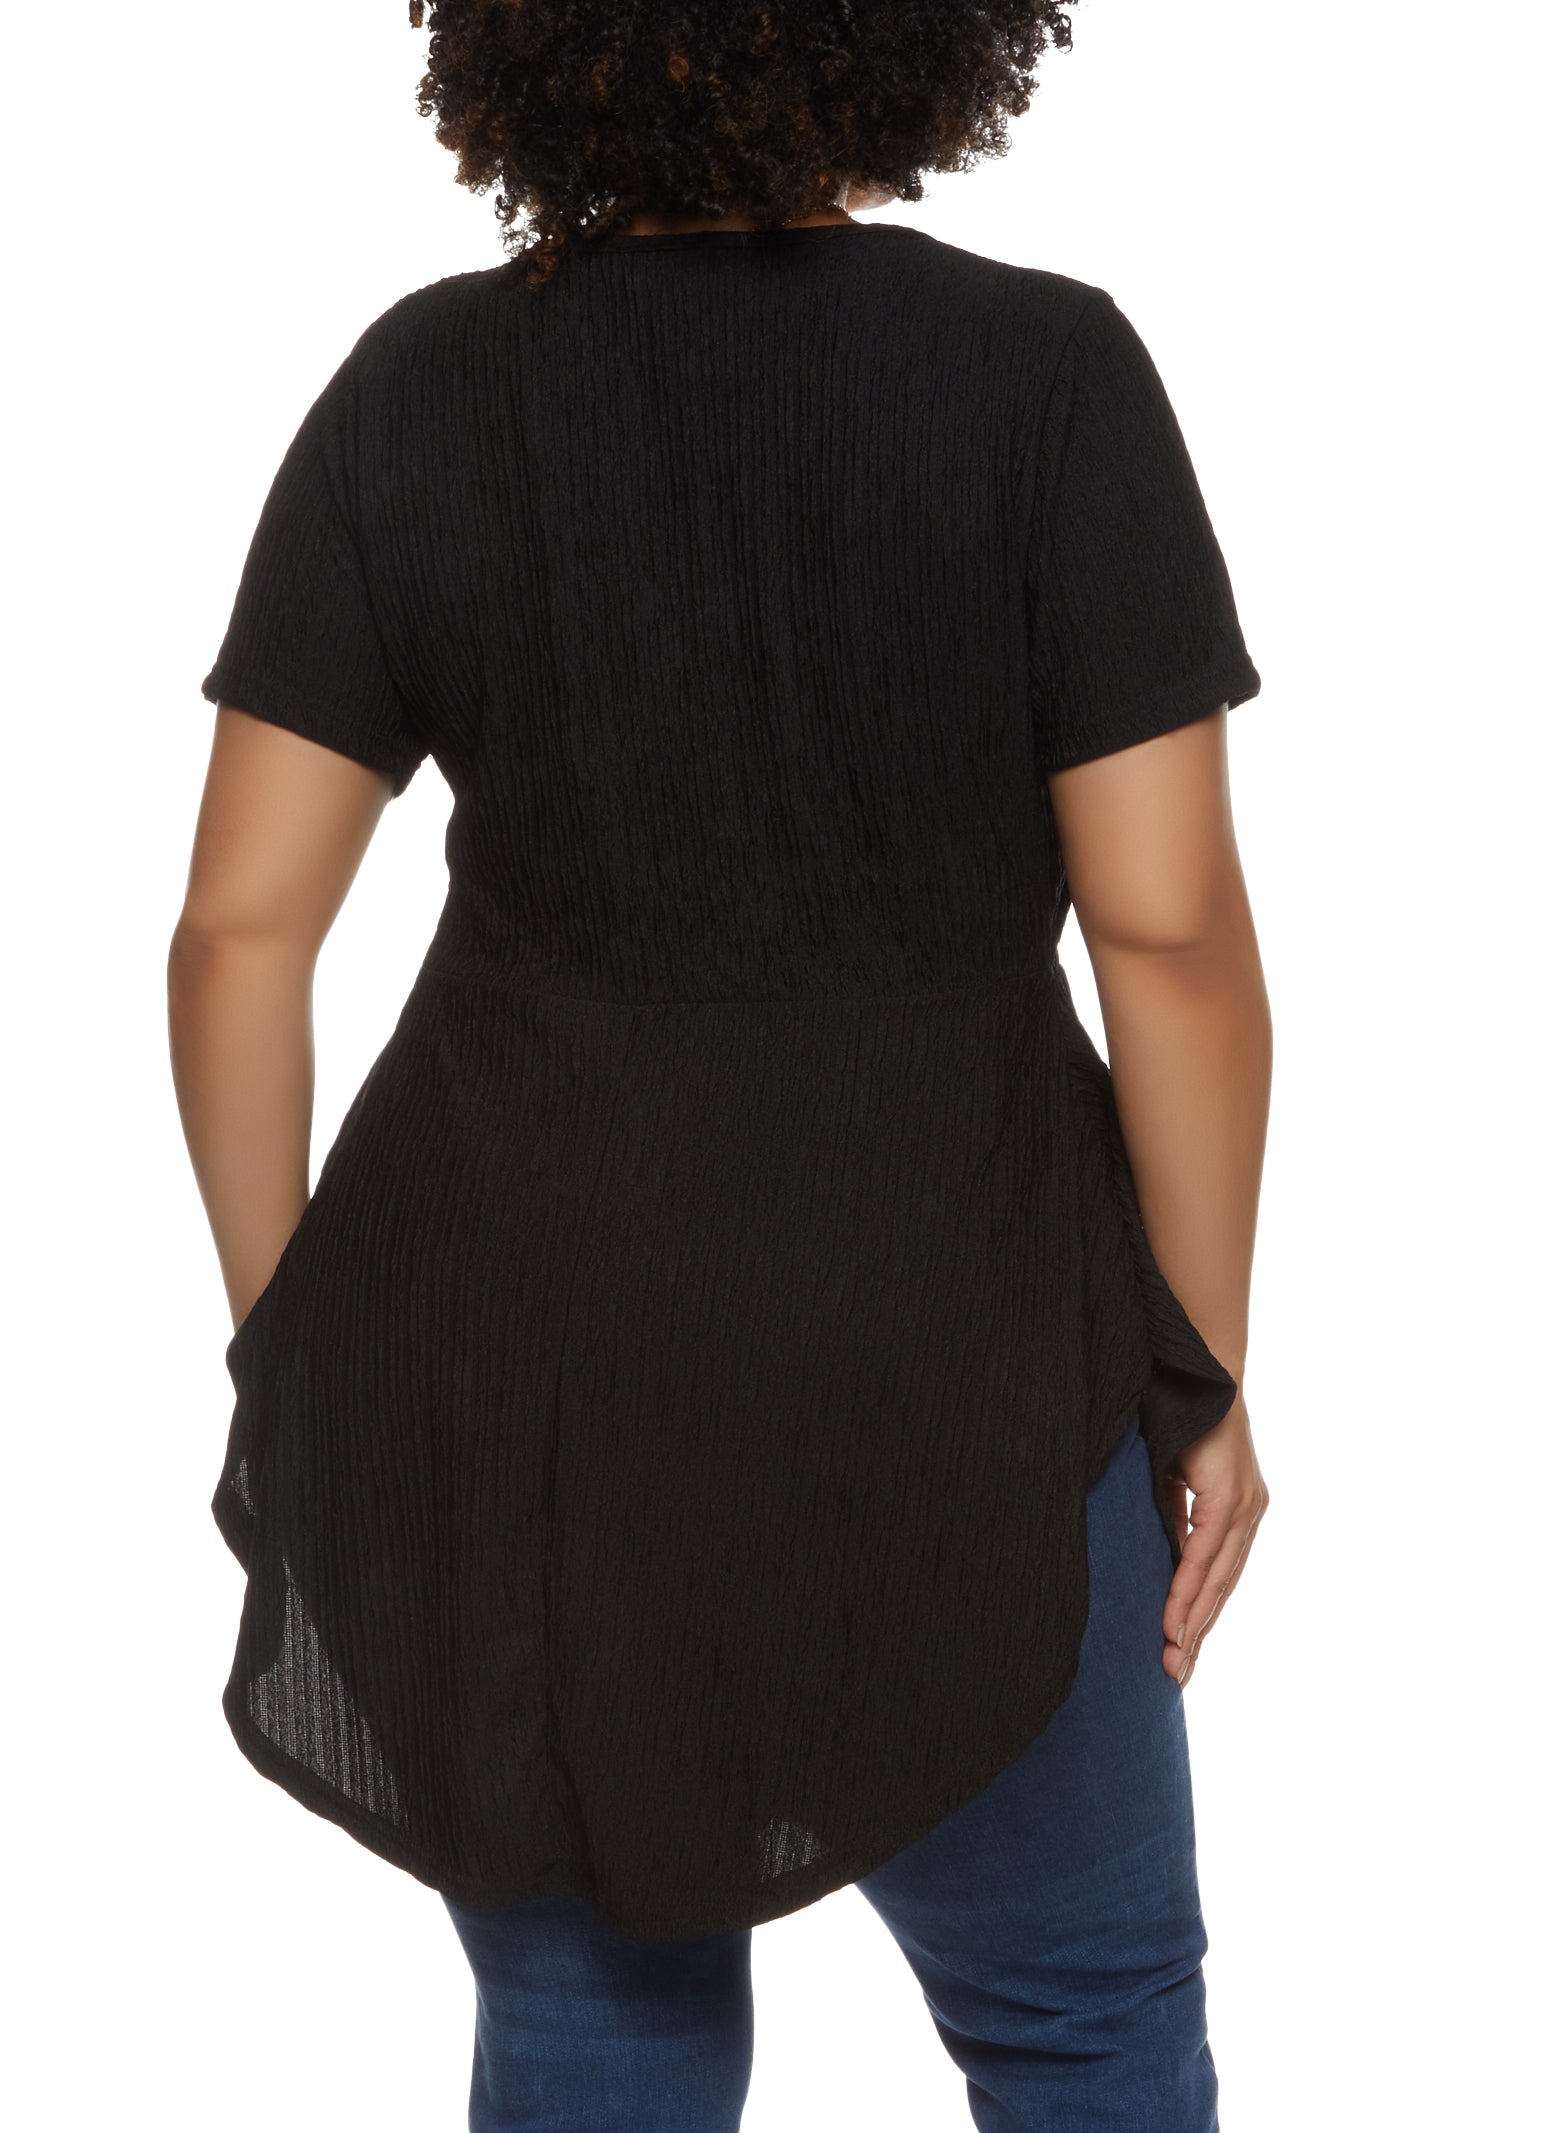 Womens Plus Size Peplum Tunic Top with Necklace, Black, Size 1X